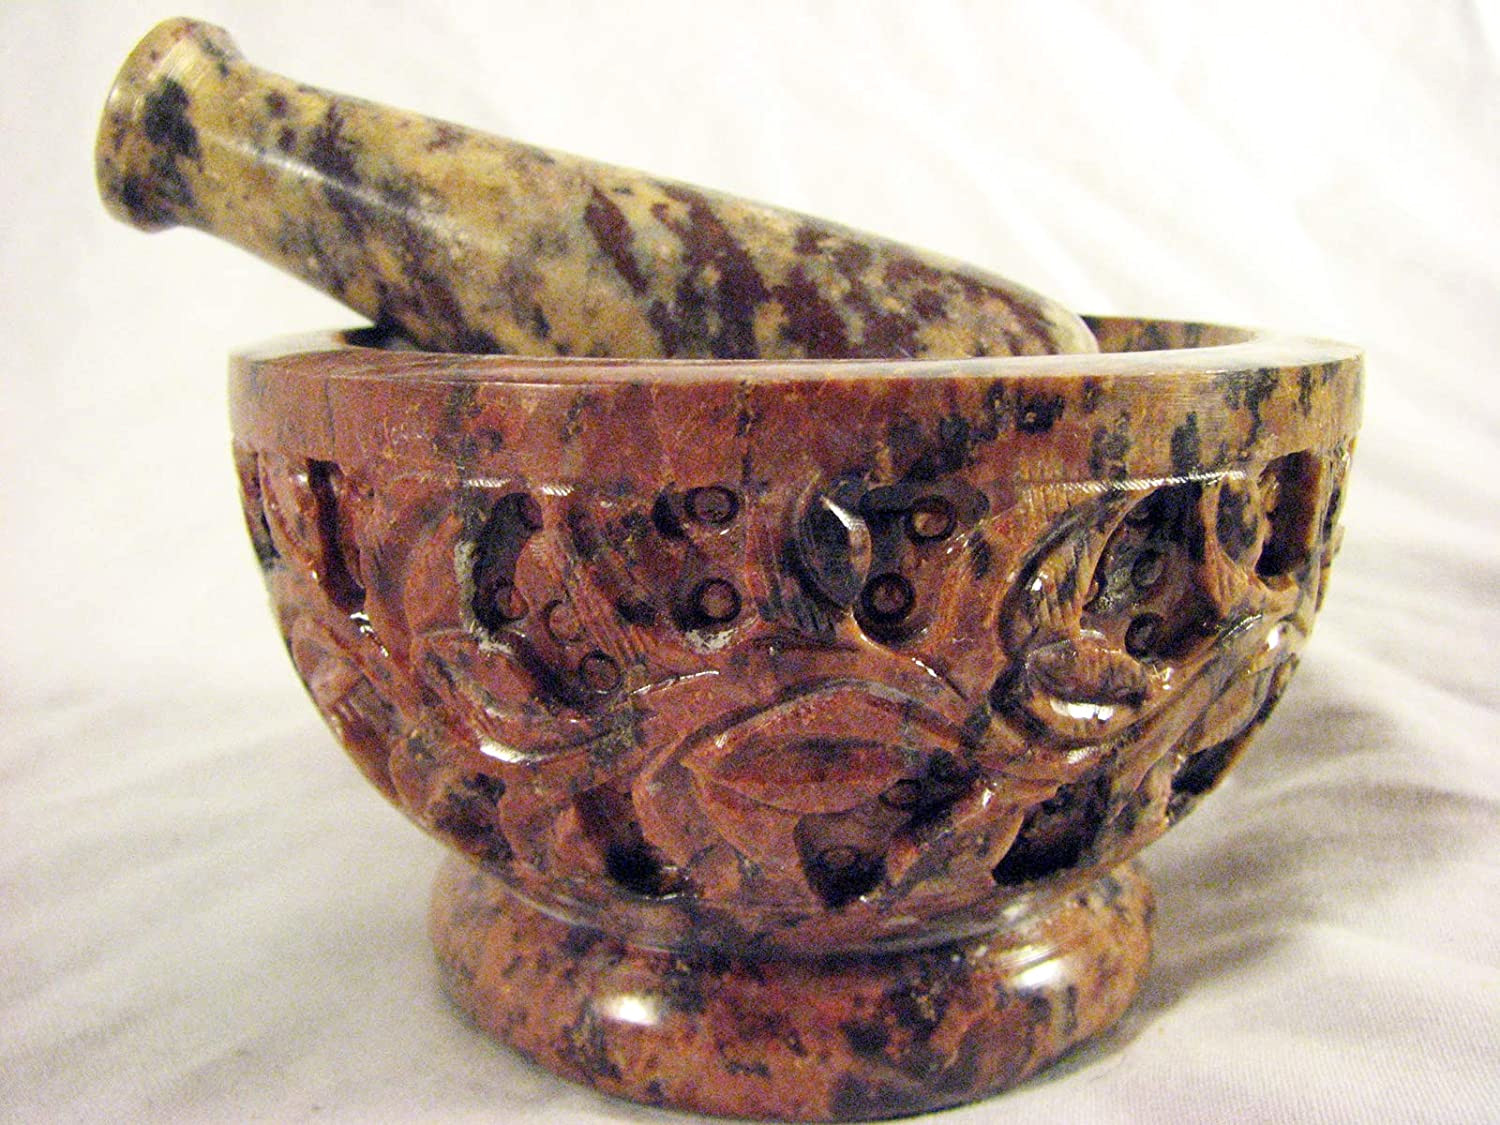 Carved Floral Soapstone Mortar & Pestle - Click Image to Close